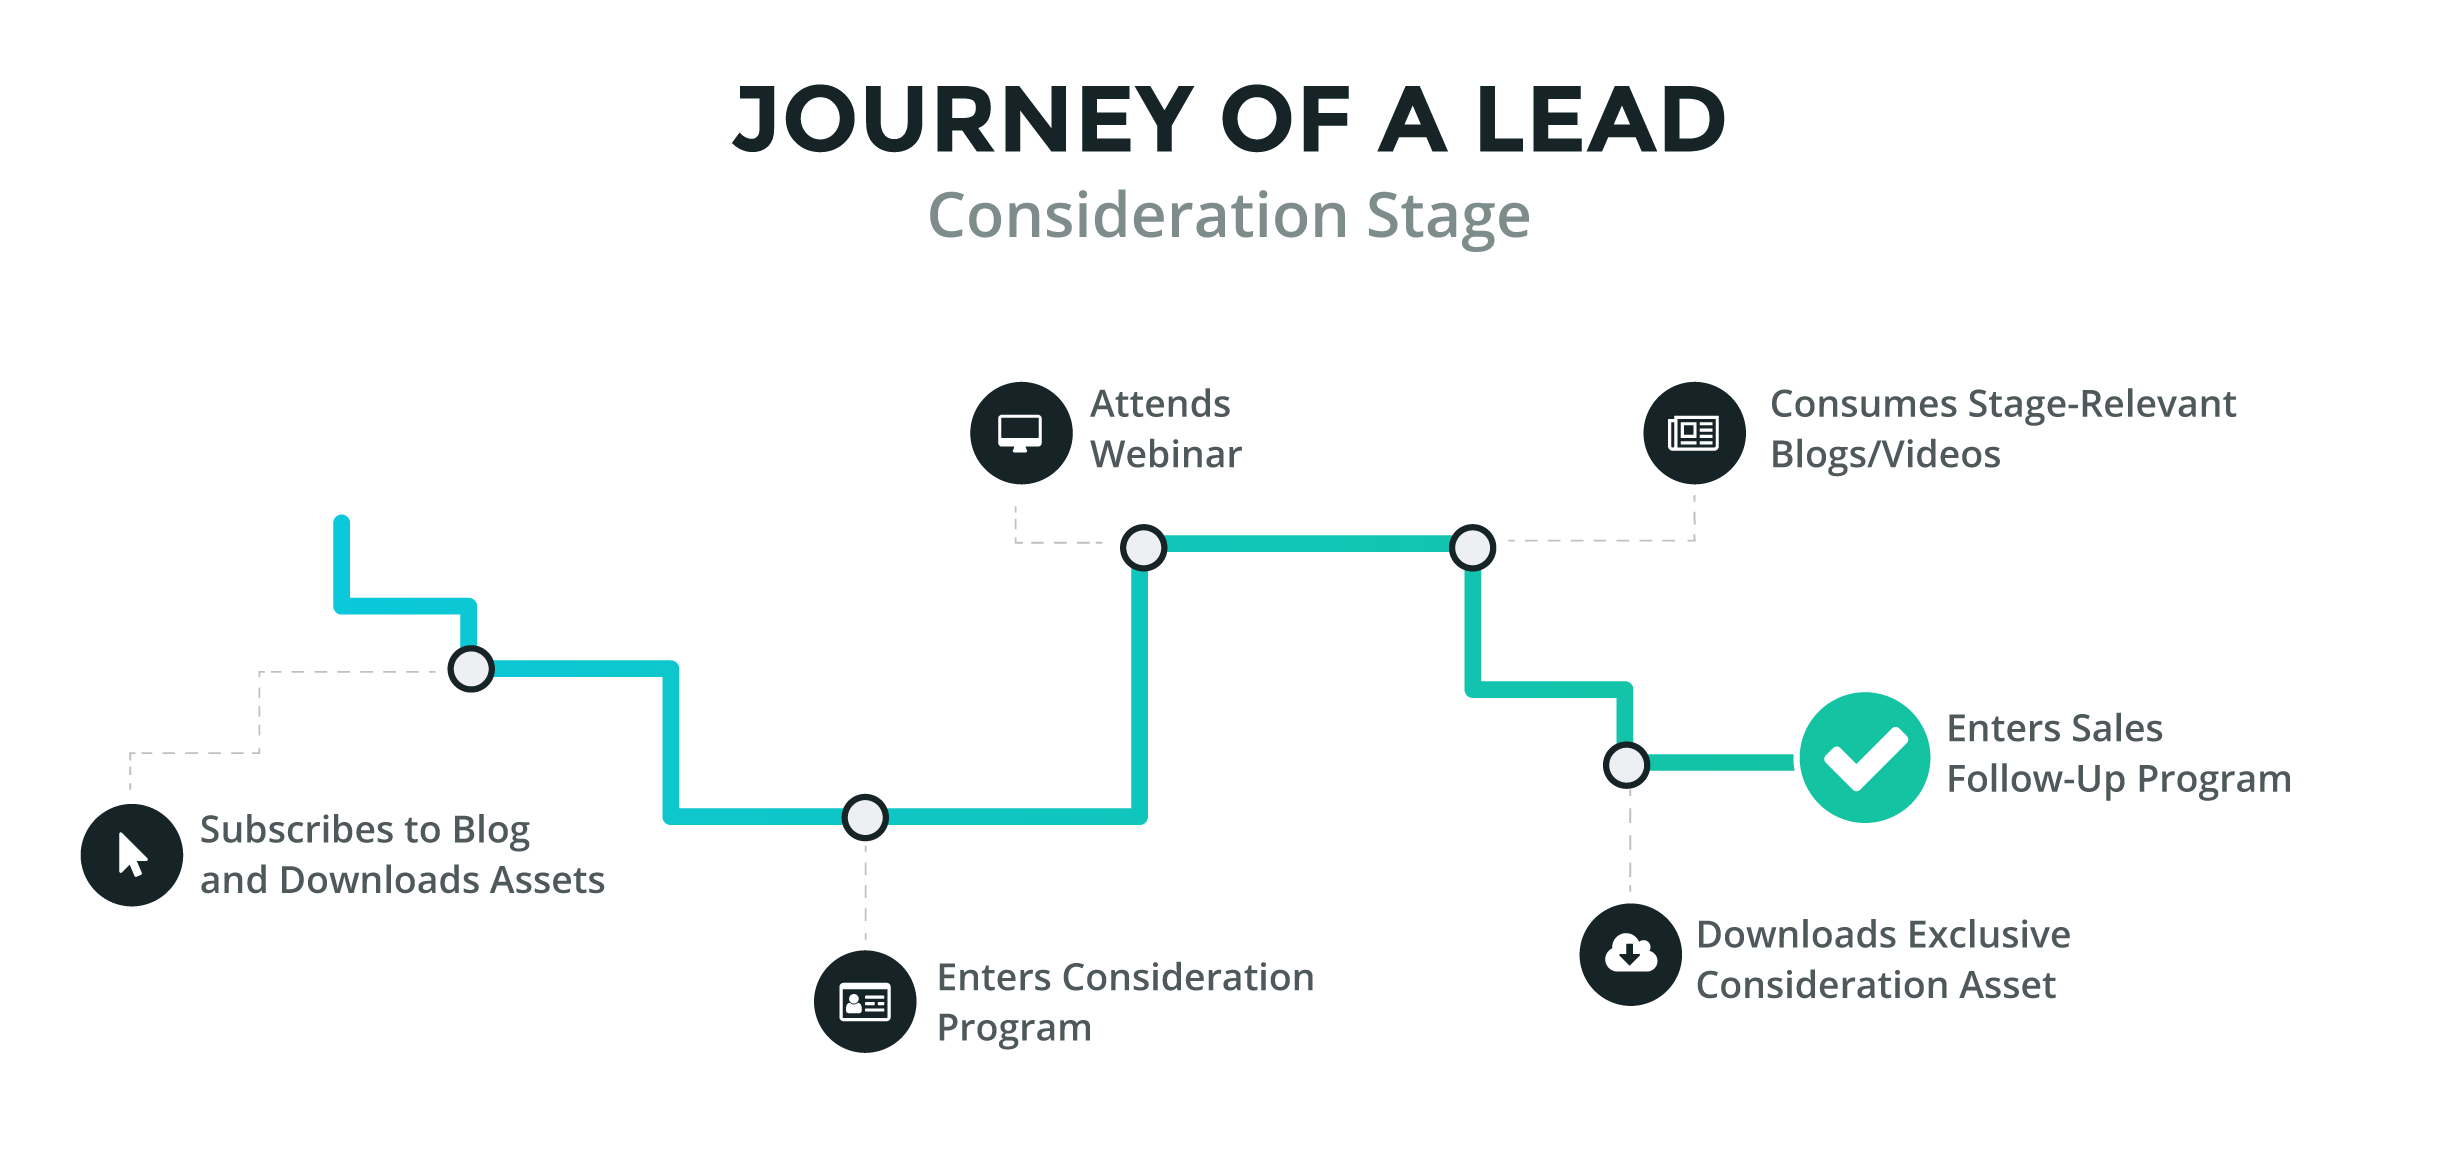 Marketing Automation: Journey of a Lead in the Consideration Stage